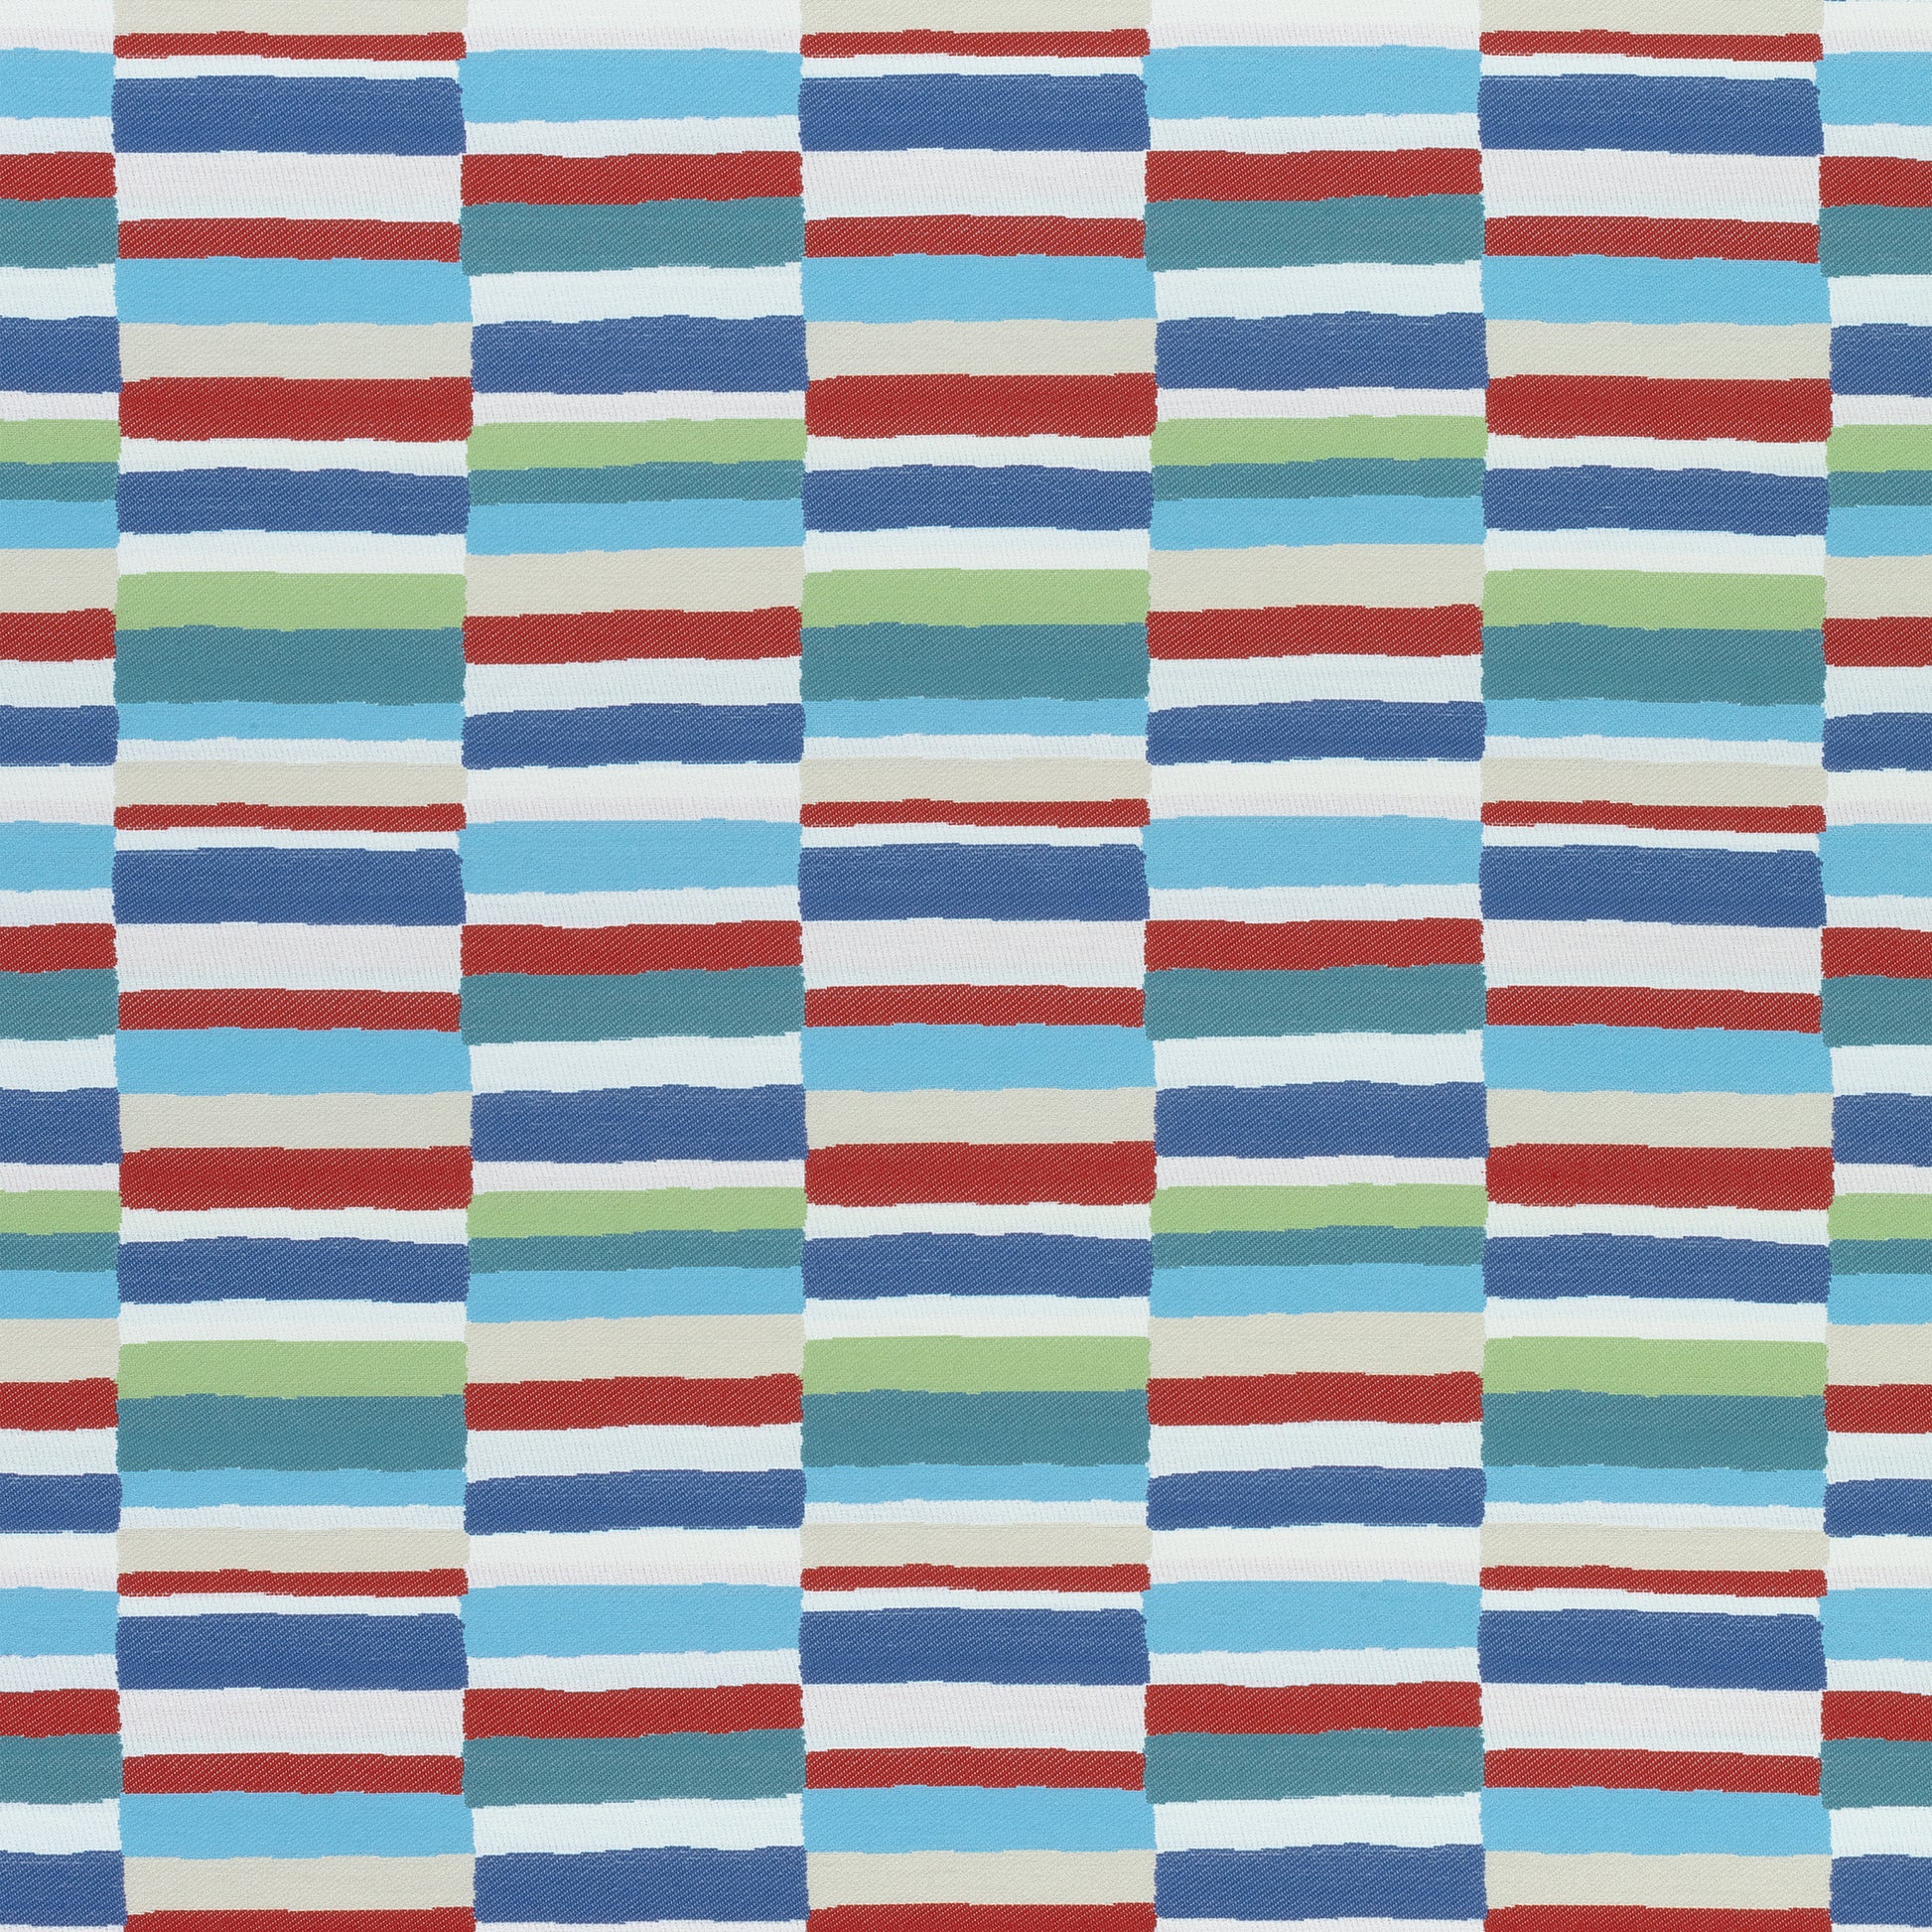 Purchase Thibaut Fabric Item W74684 pattern name Carnivale color Red, Blue and Green